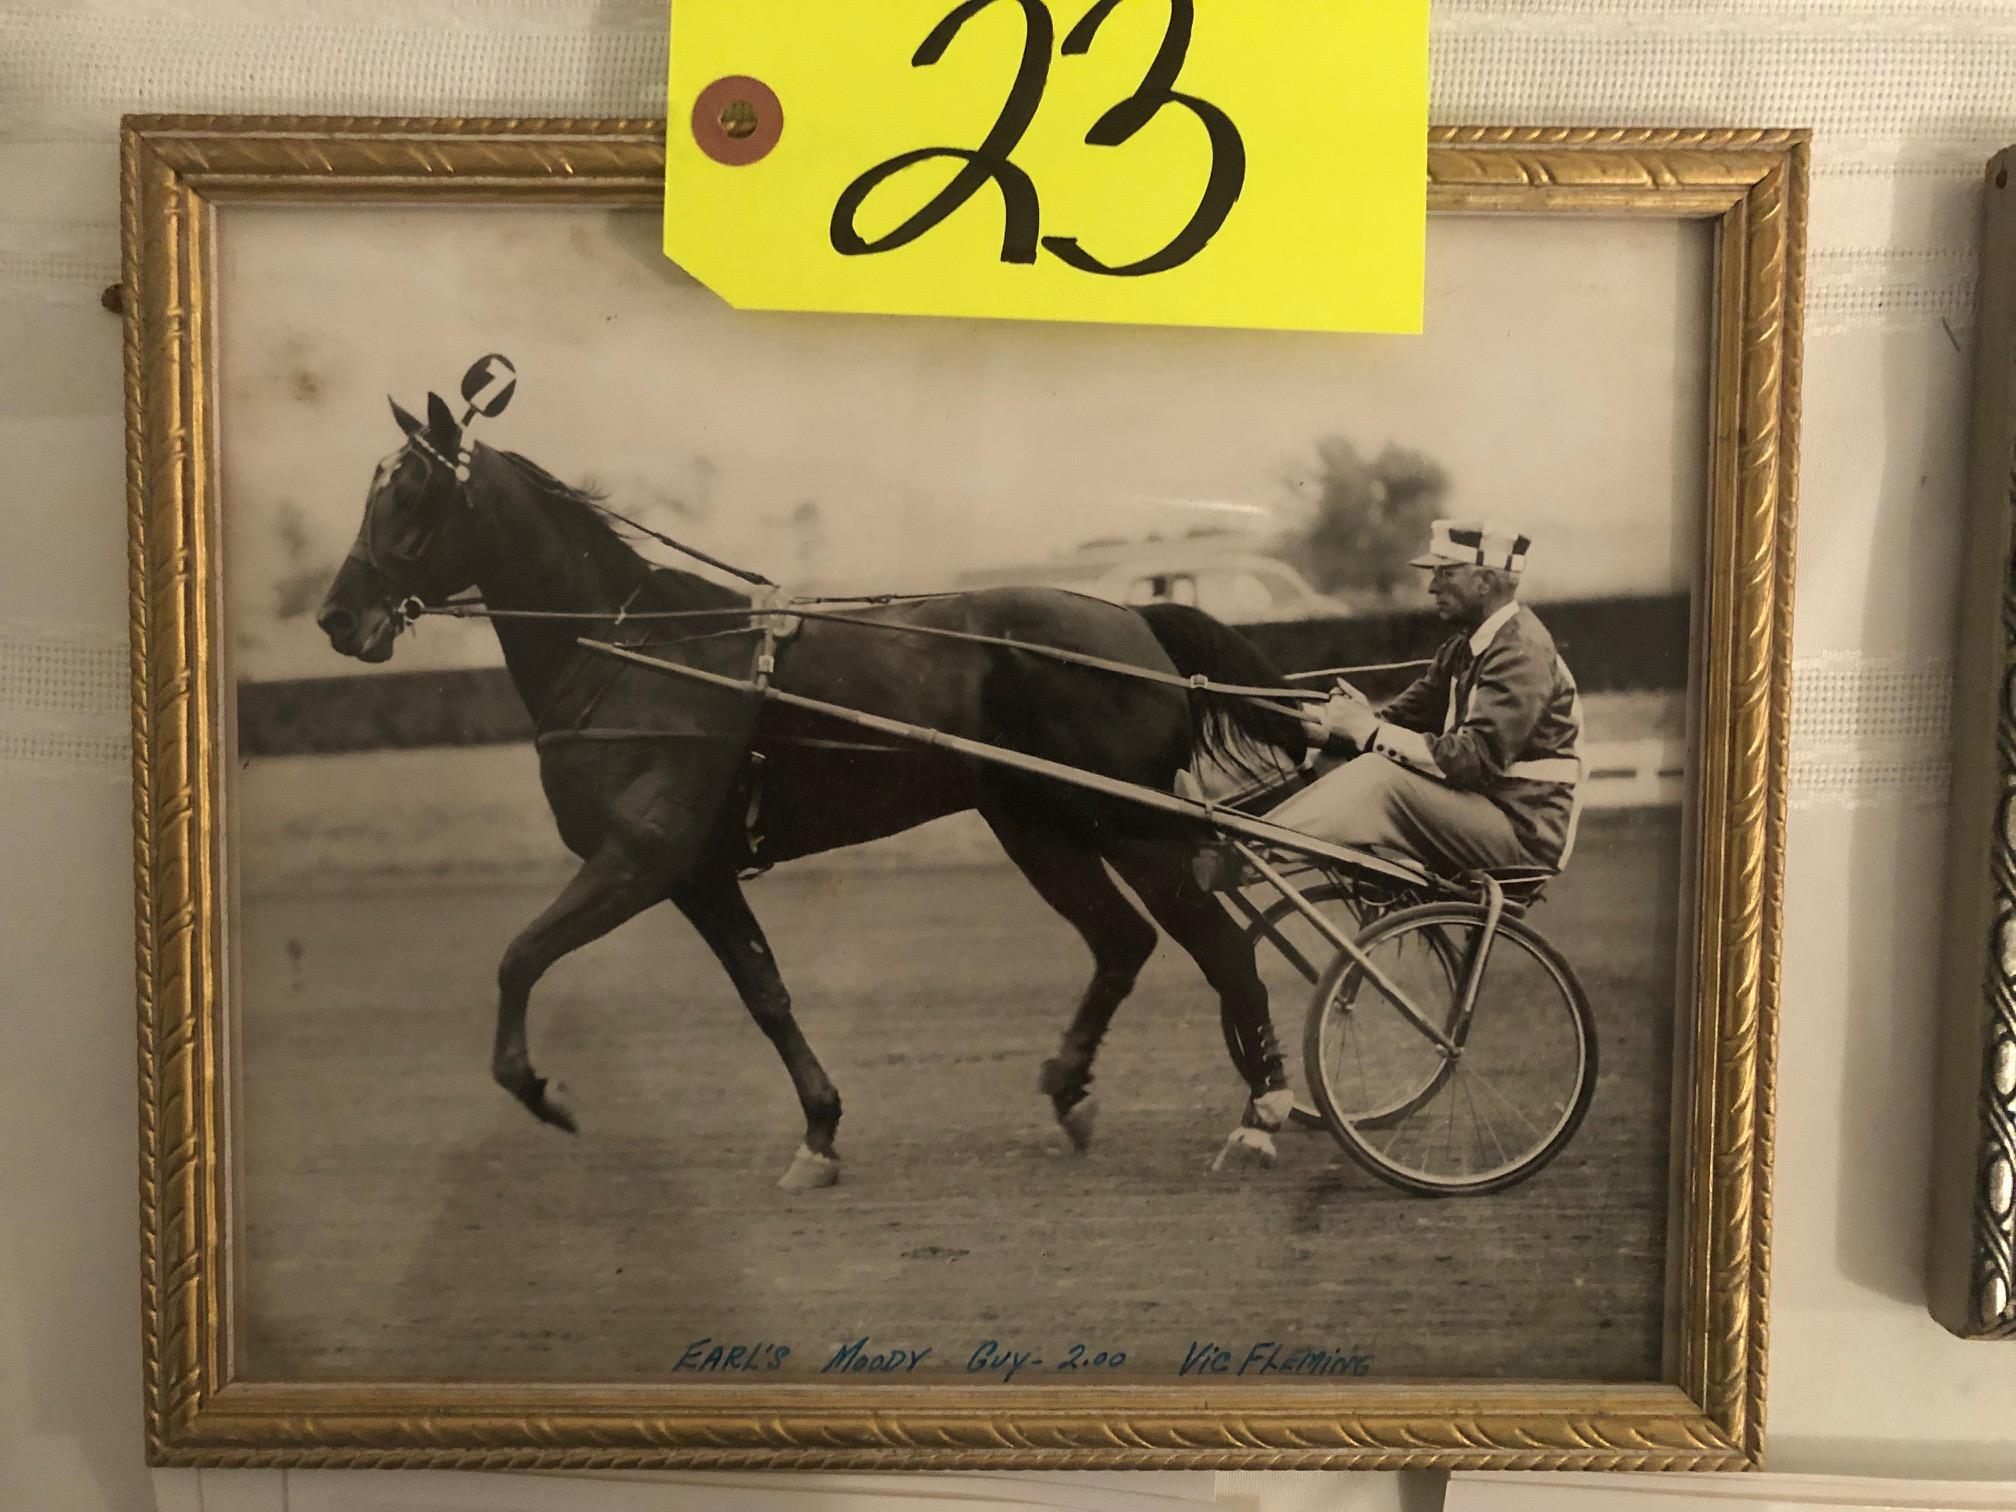 Photograph of Vic Fleming driving Earls Moddy Guy, framed & under glass, ap